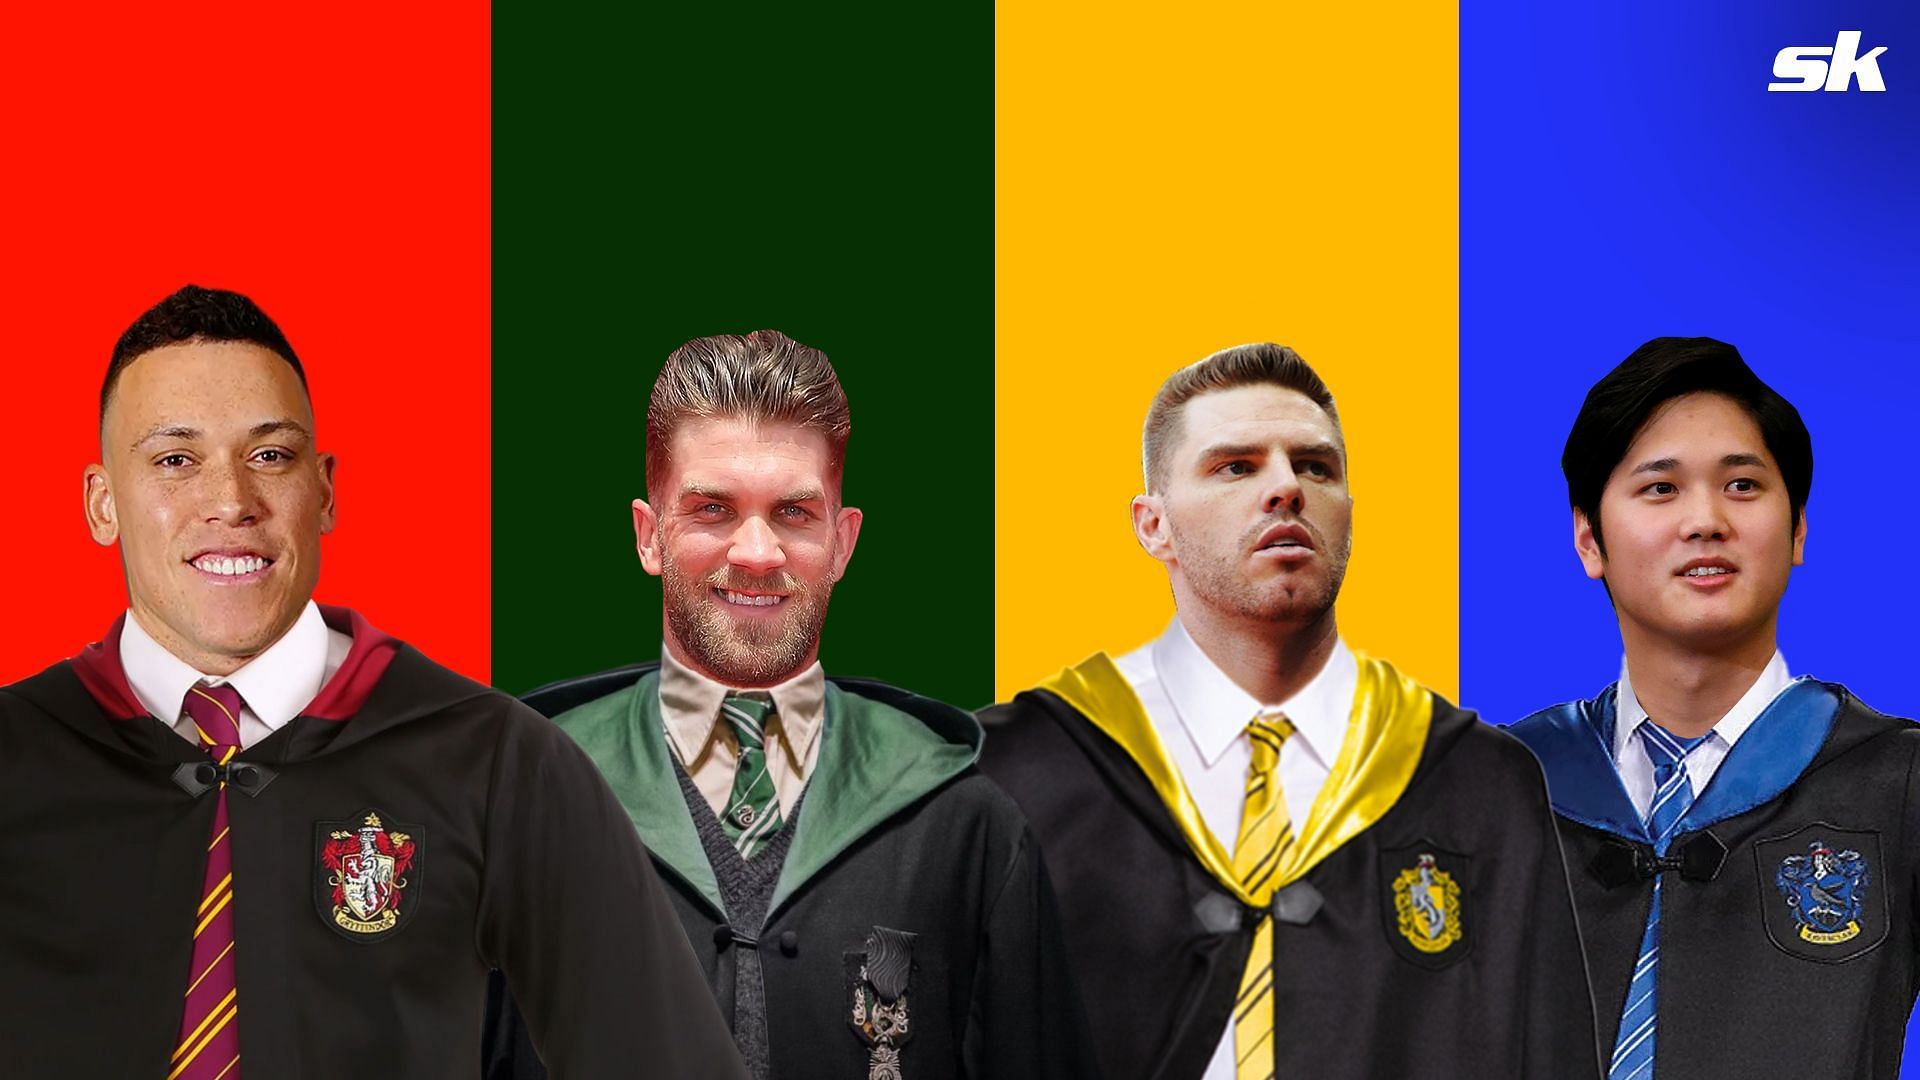 We asked AI to sort MLB players into respective Harry Potter houses